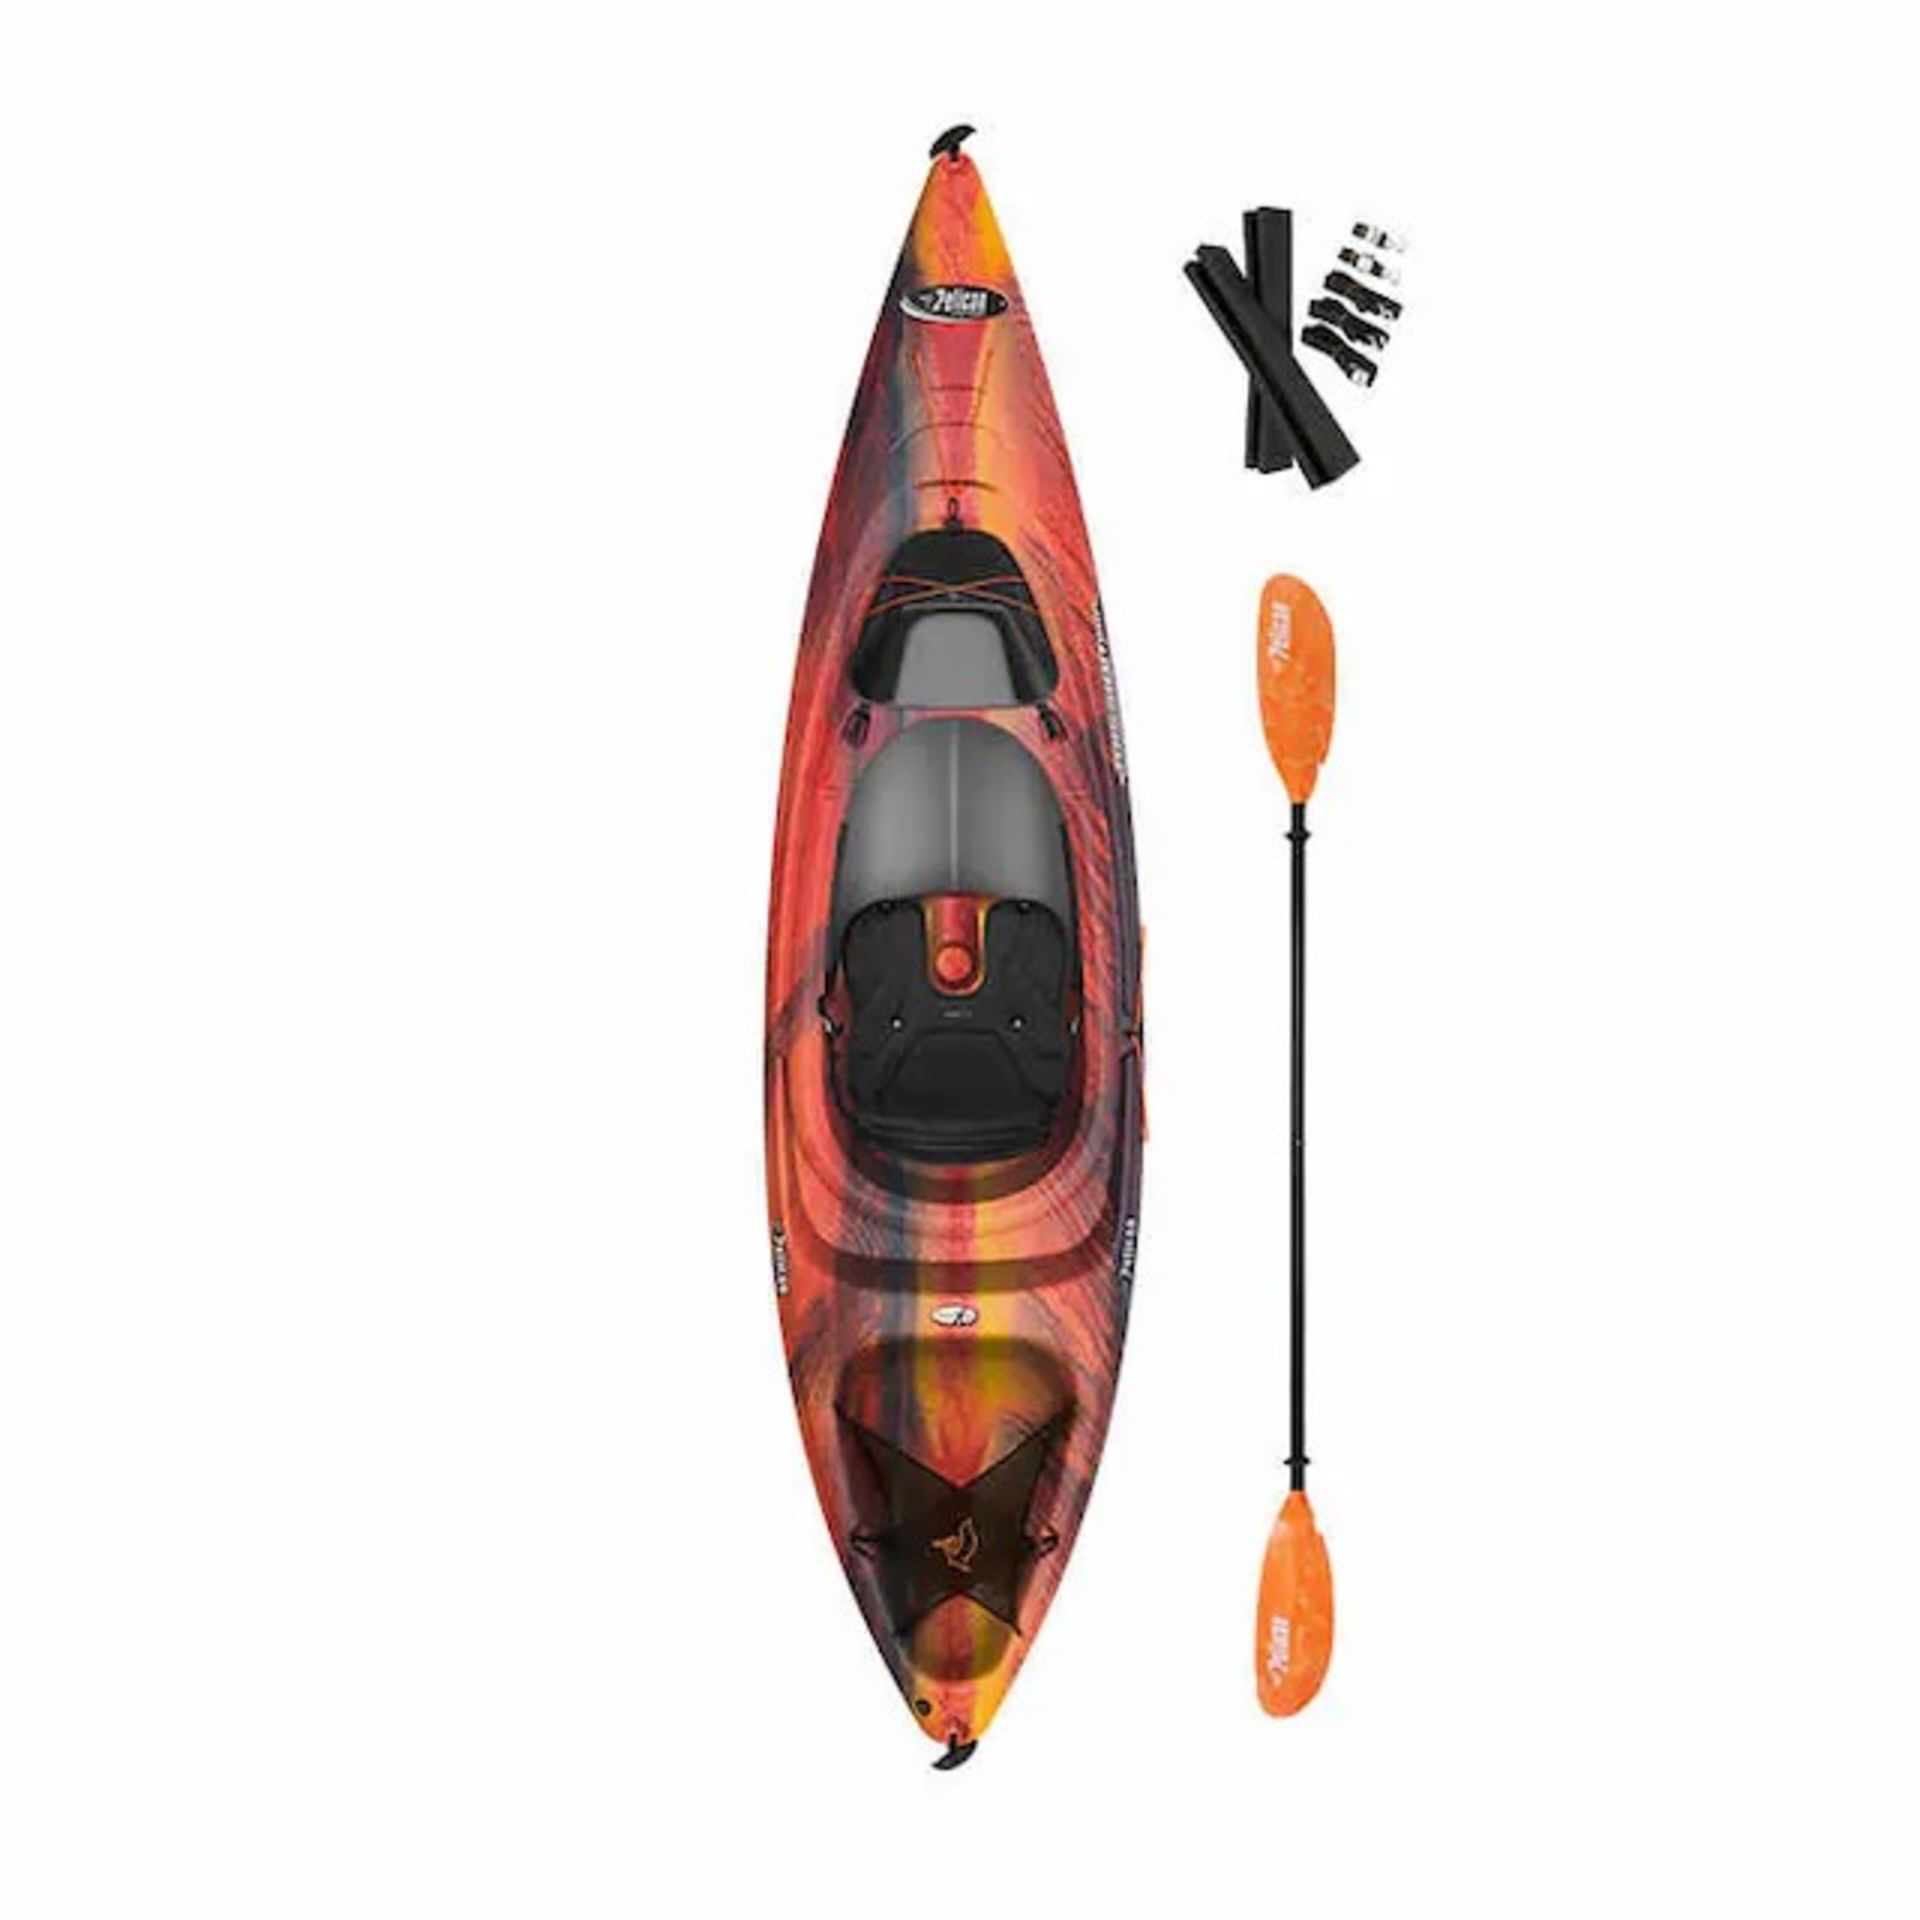 PELICAN MISSION 100 KAYAK WITH PADDLE - Image 2 of 4